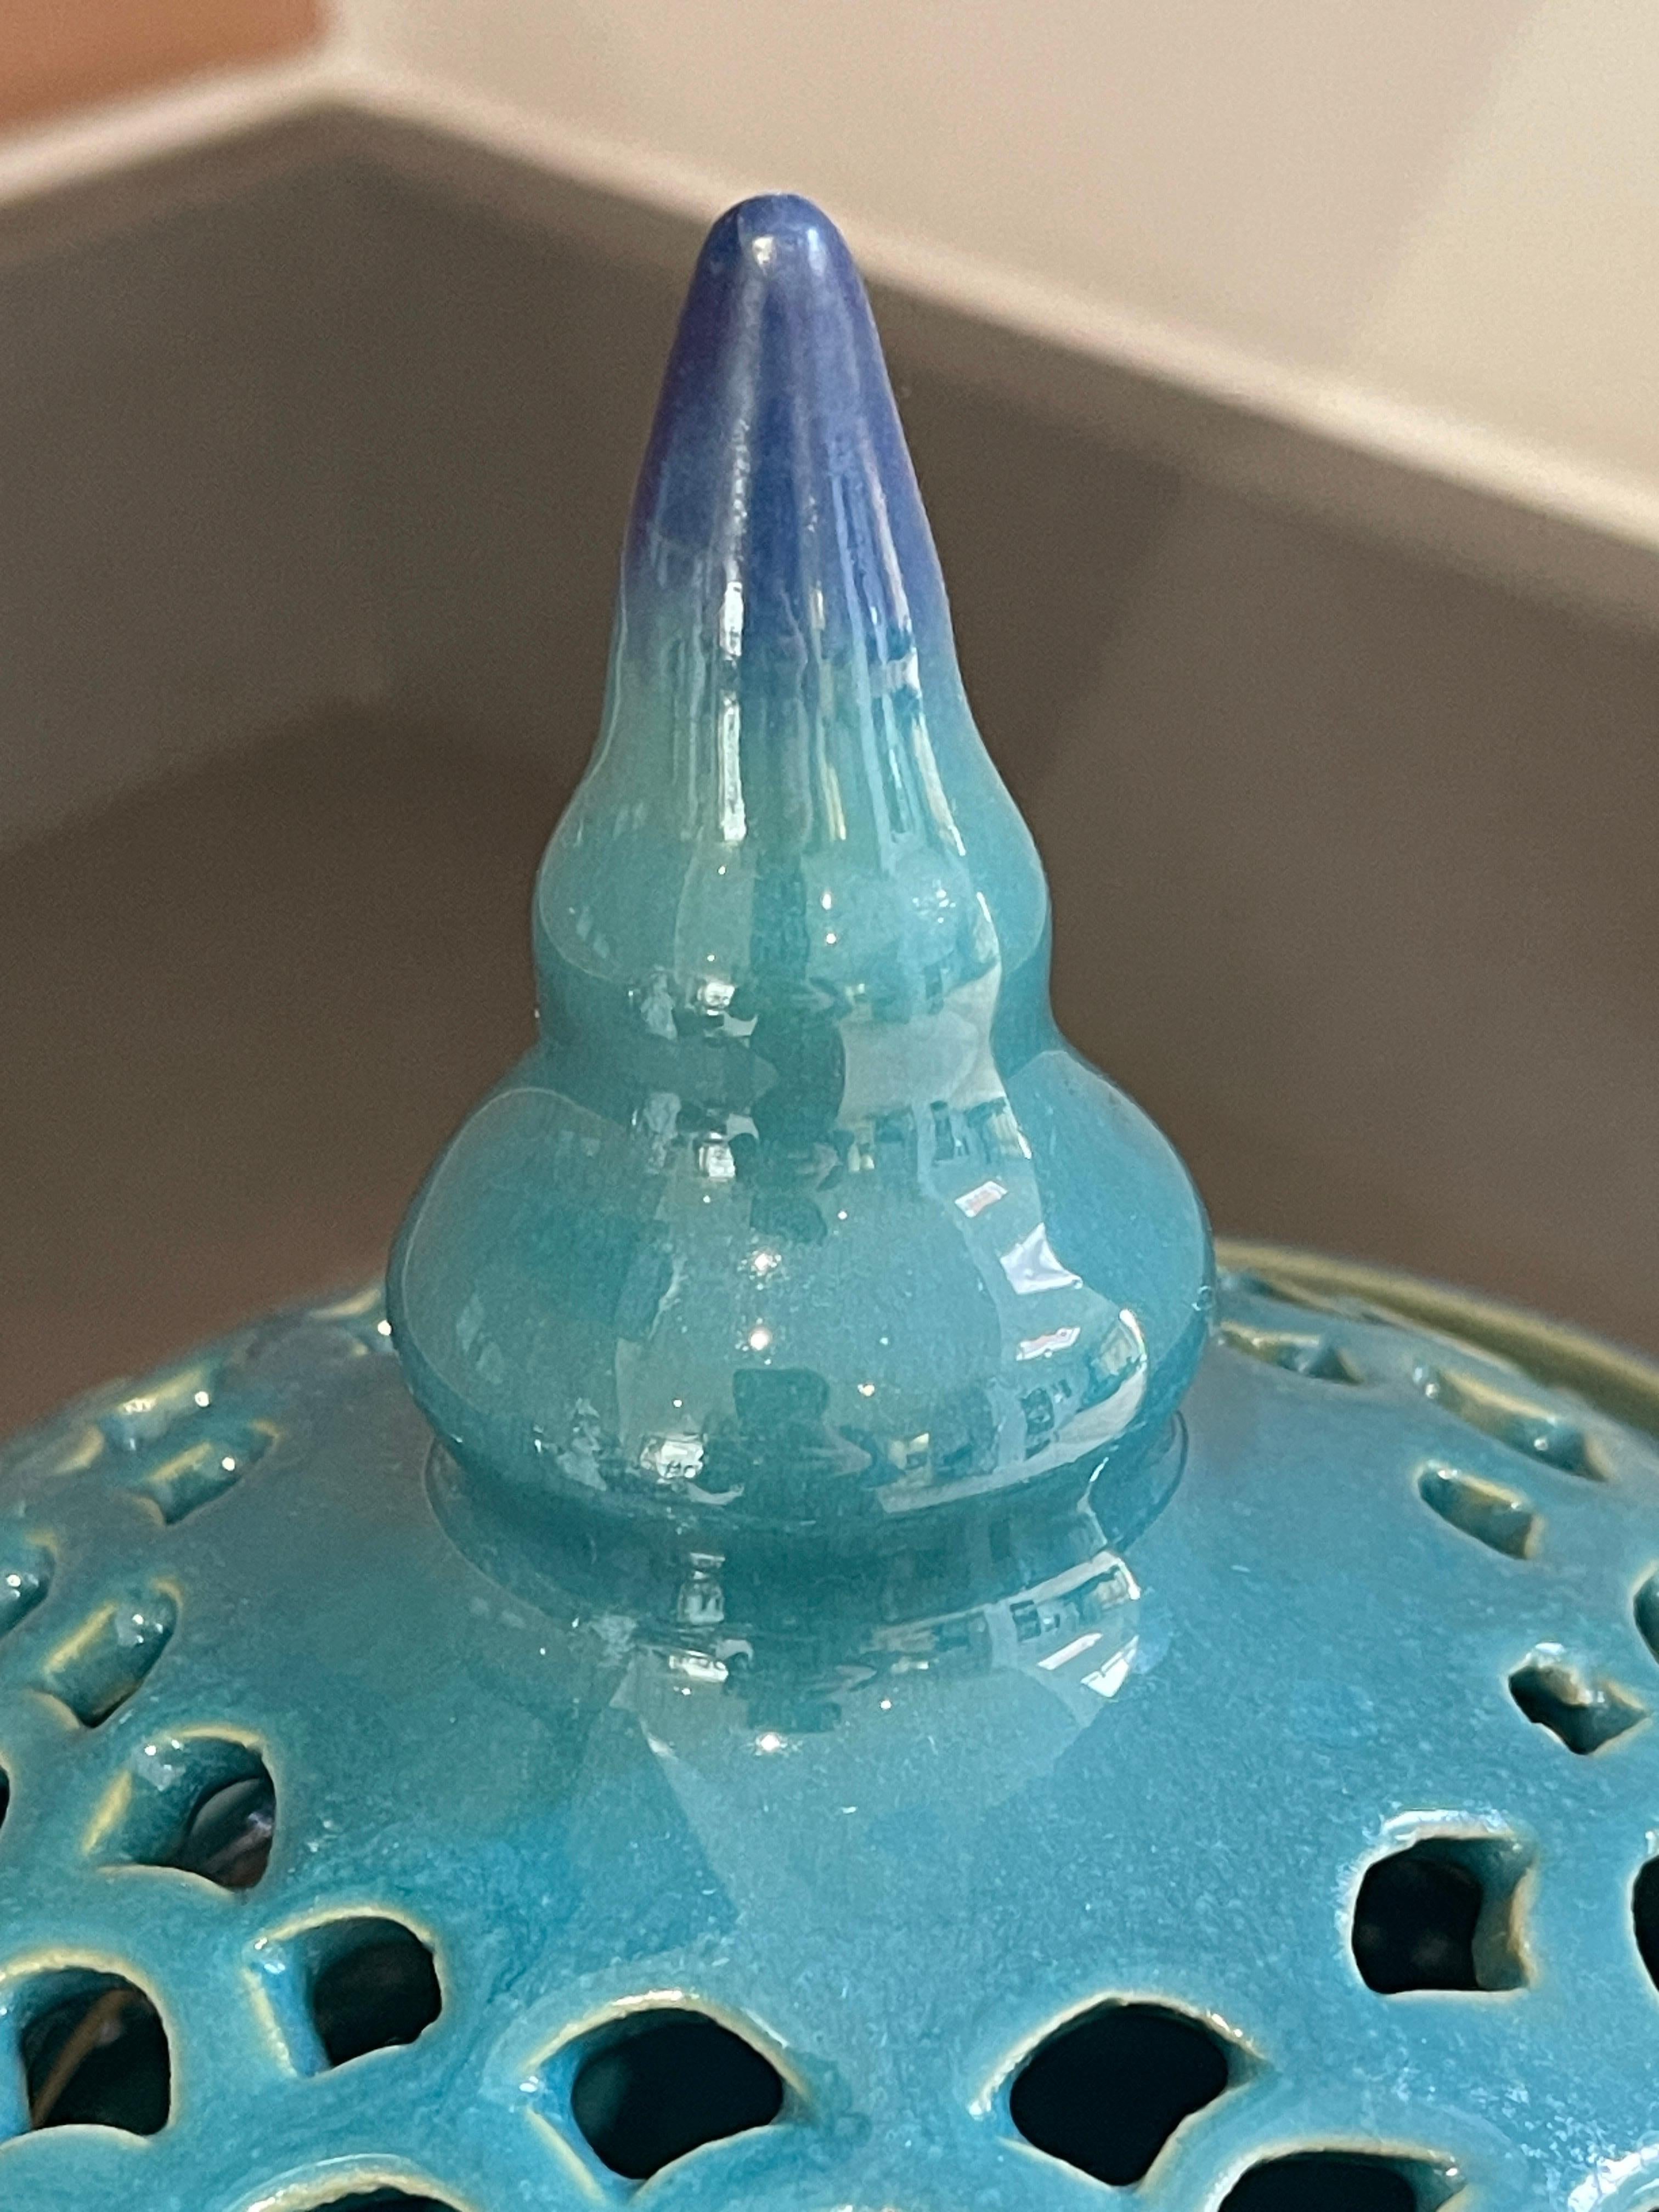 Hand-Carved Candle Holder Hand Crafted Blue Ceramic Torches With Stand &Lid For Sale